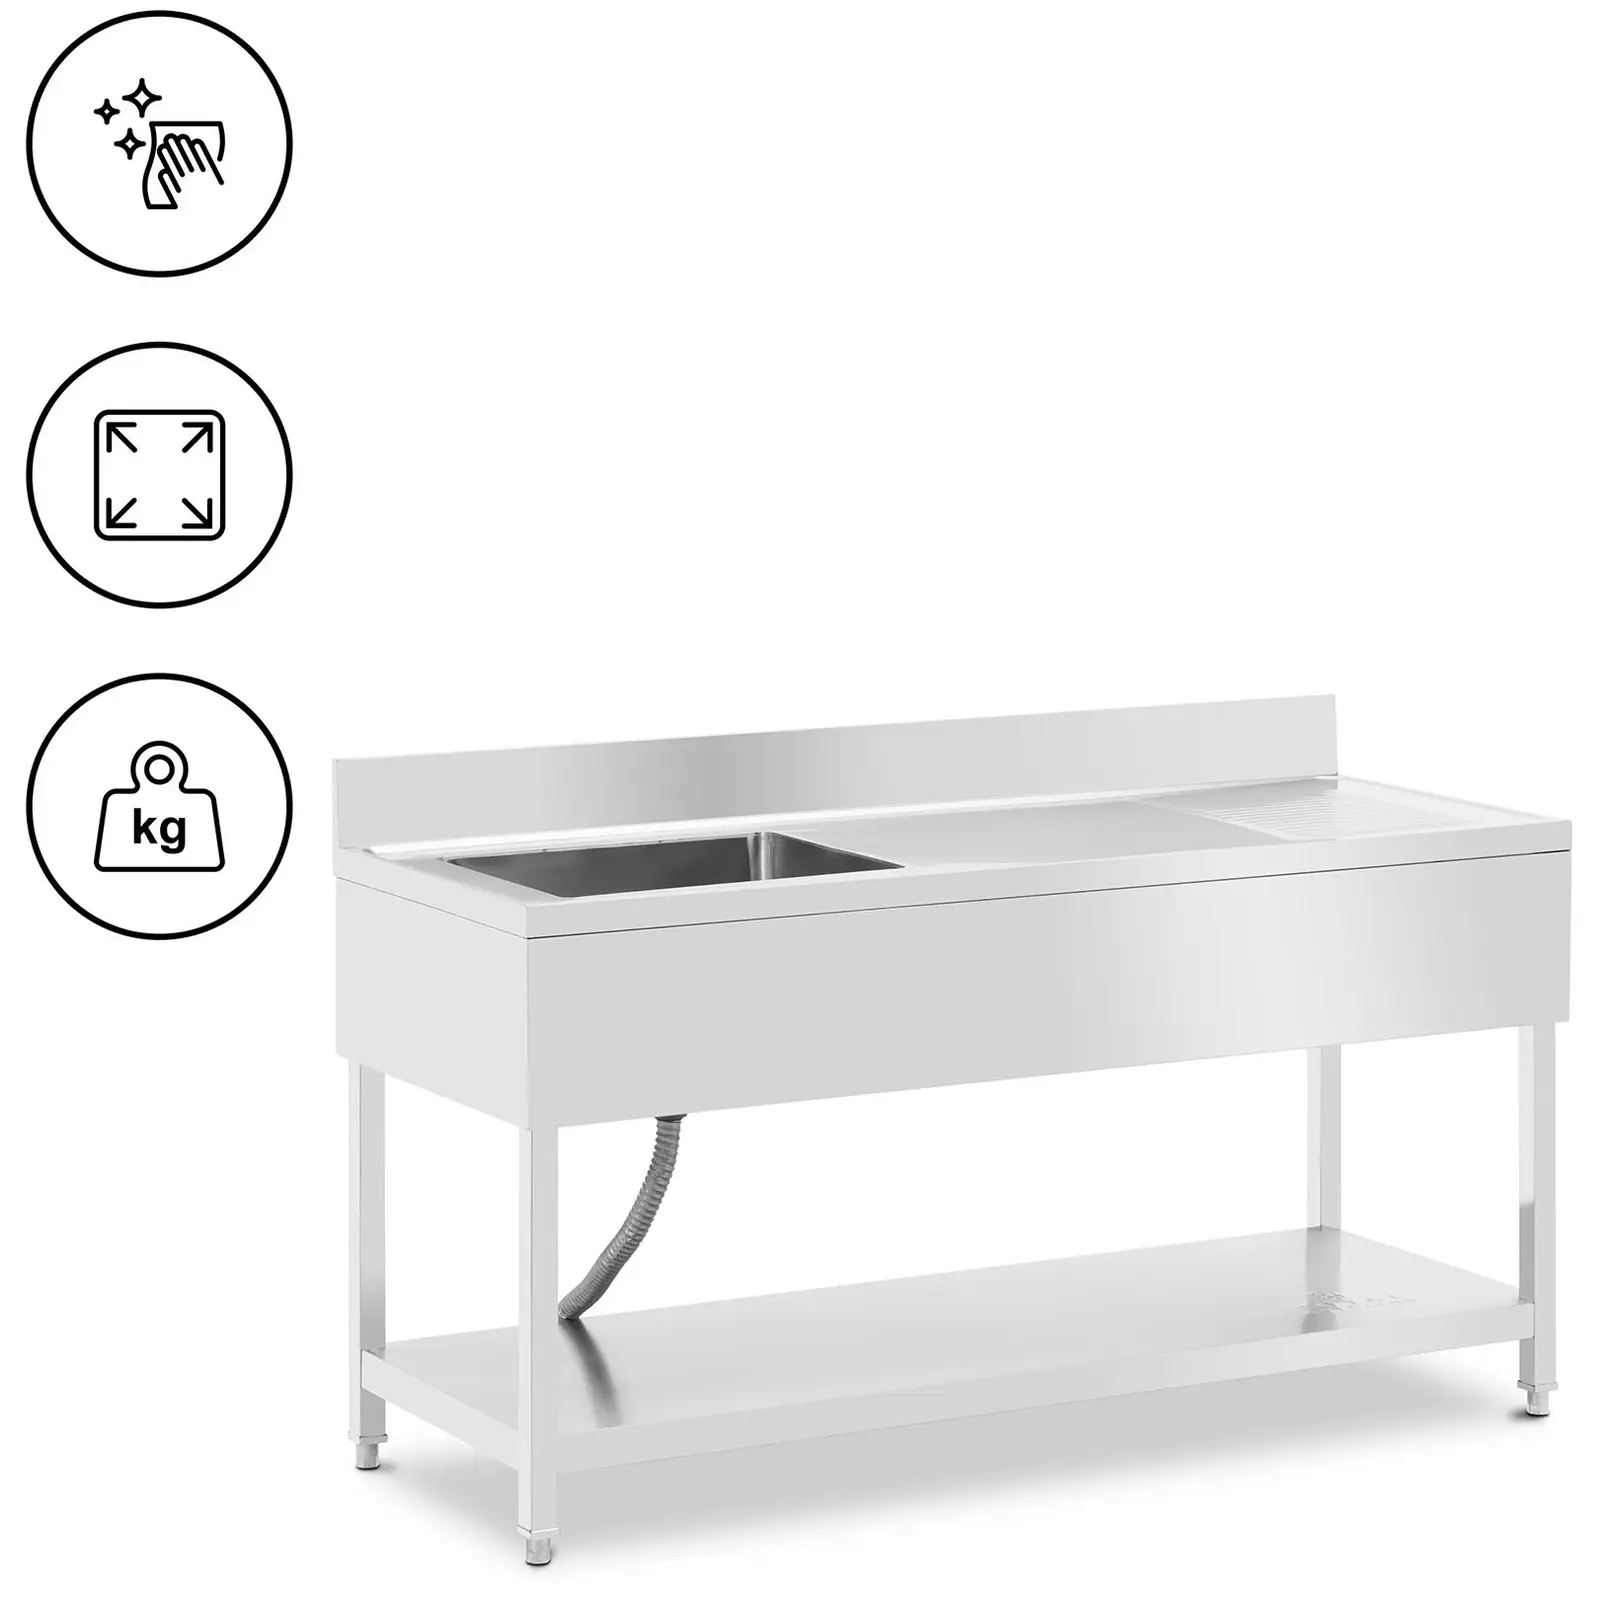 Sink Unit - 1 basin - stainless steel - 160 x 60 x 97 cm - Royal Catering